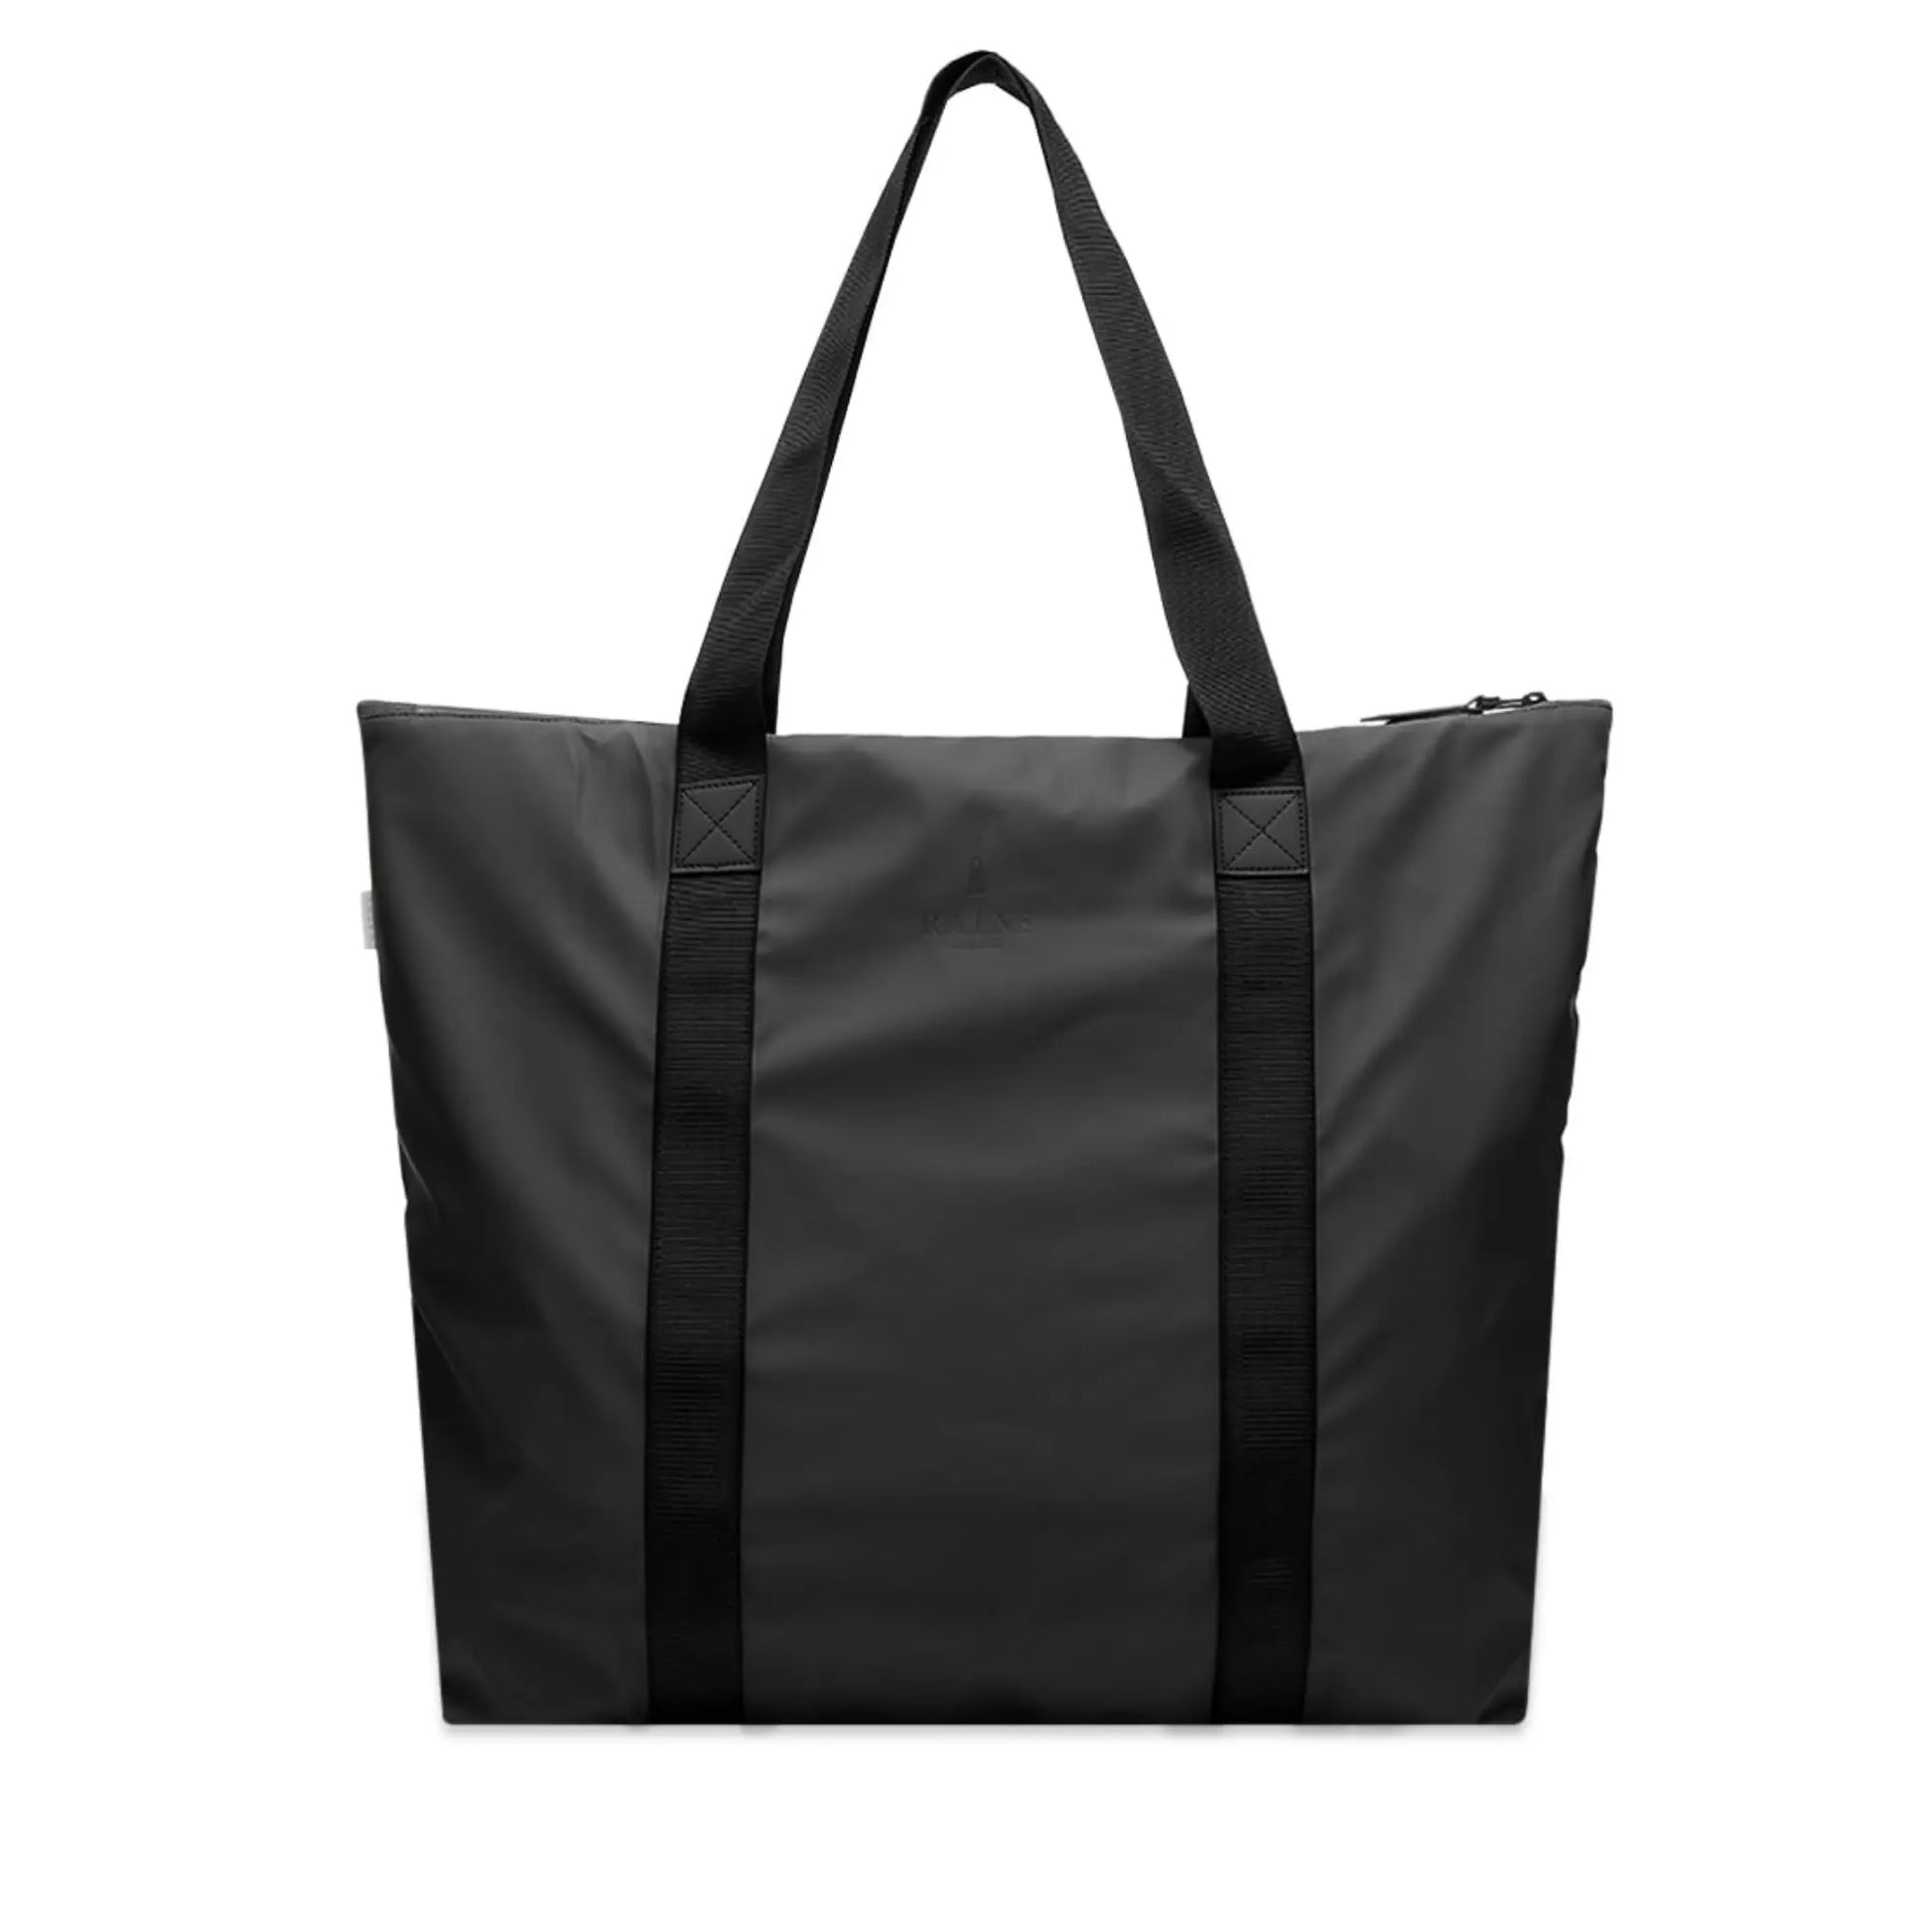 Rains waterproof tote bag black for men and women front view